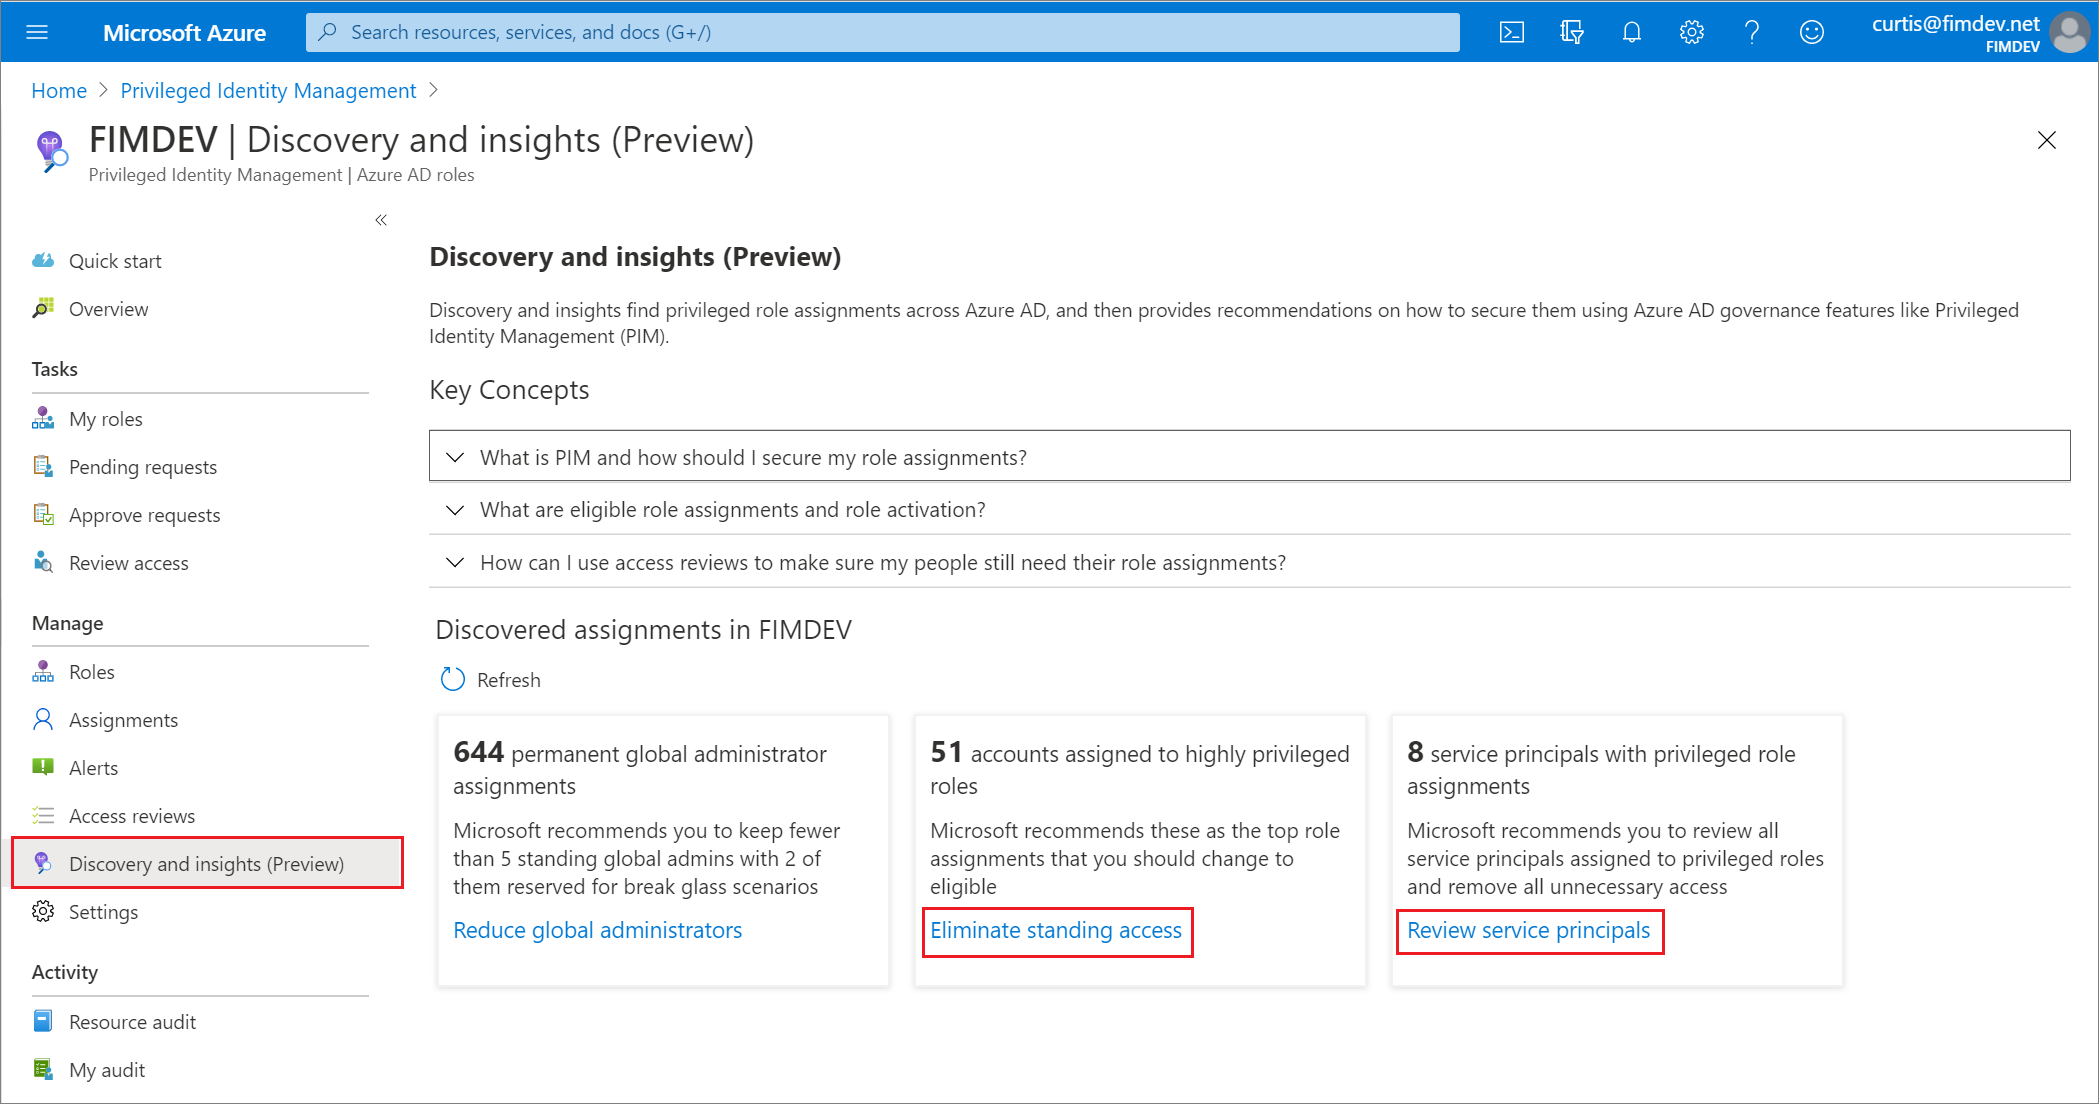 Screenshot showing additional insights options to eliminate standing access and review service principals.